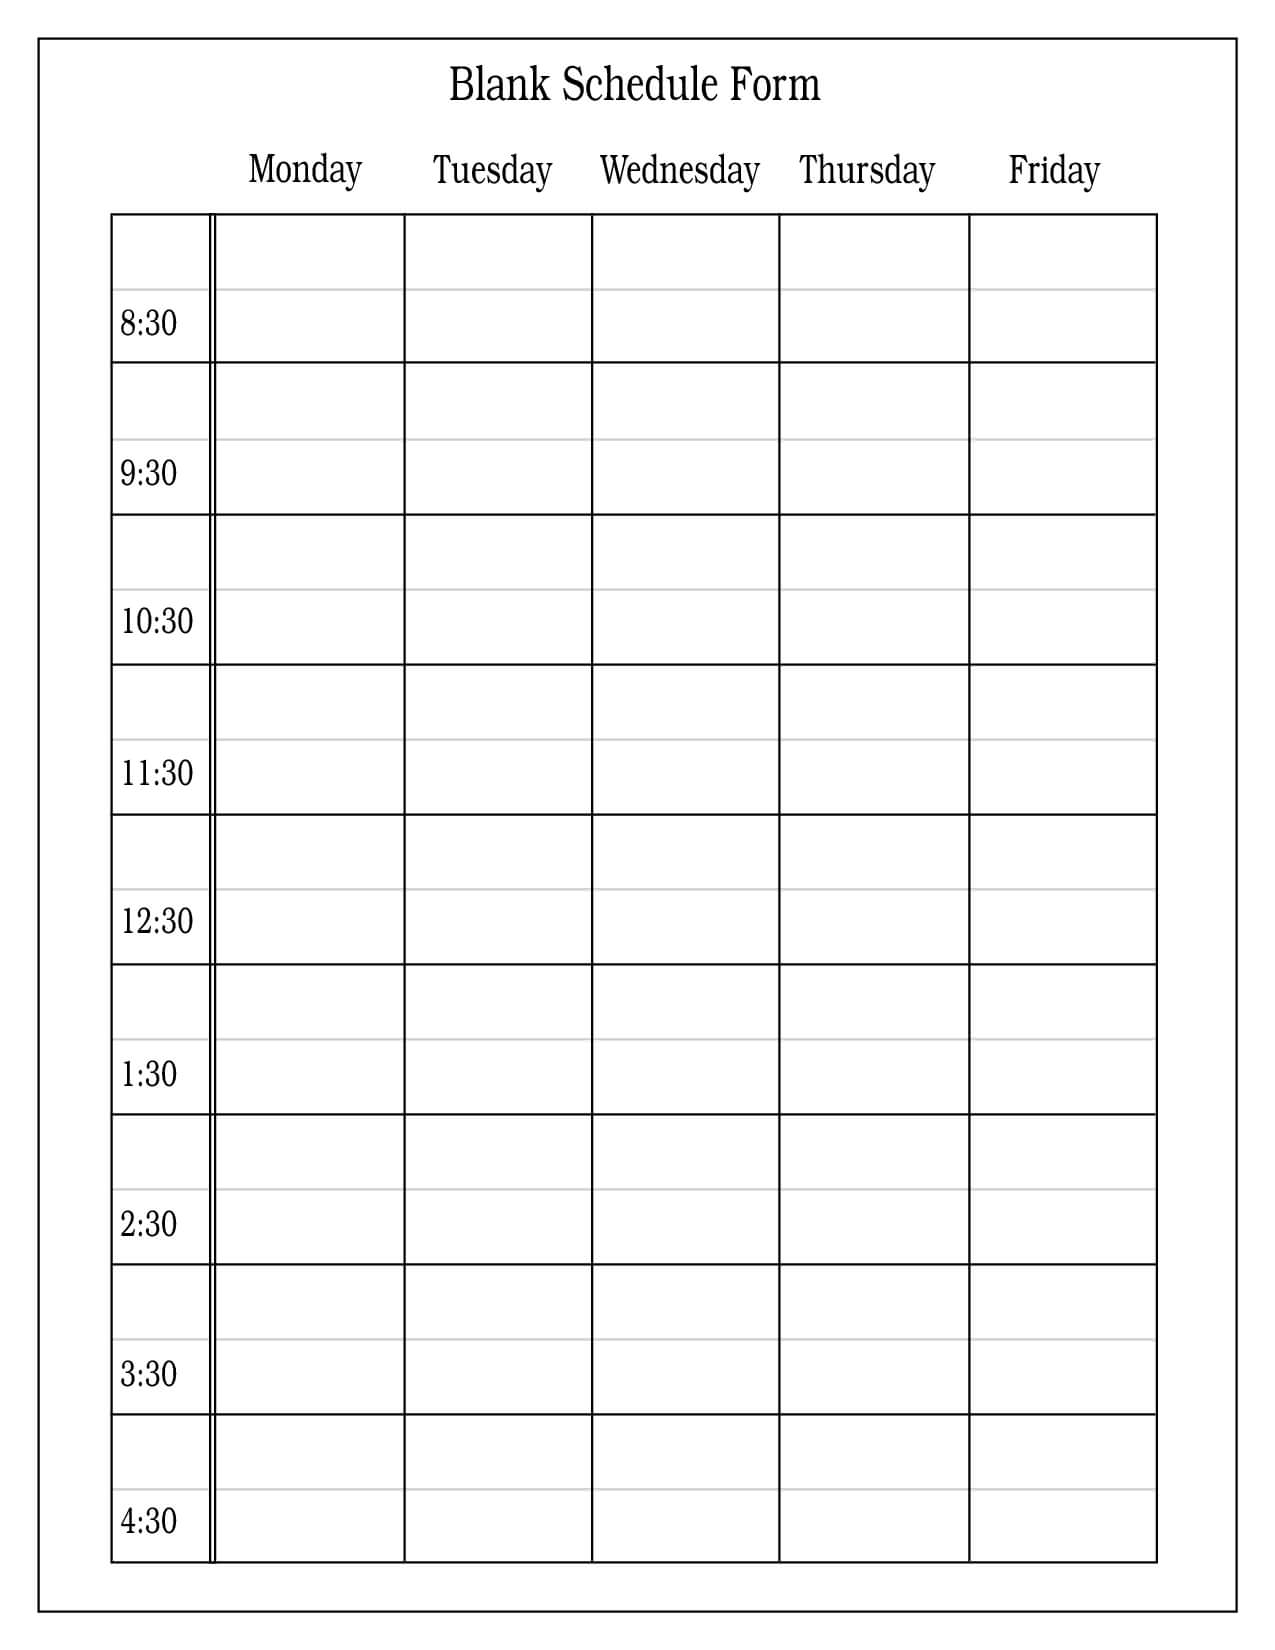 Free+Blank+Daily+Schedule+Form | Daily Schedule Template Within Printable Blank Daily Schedule Template